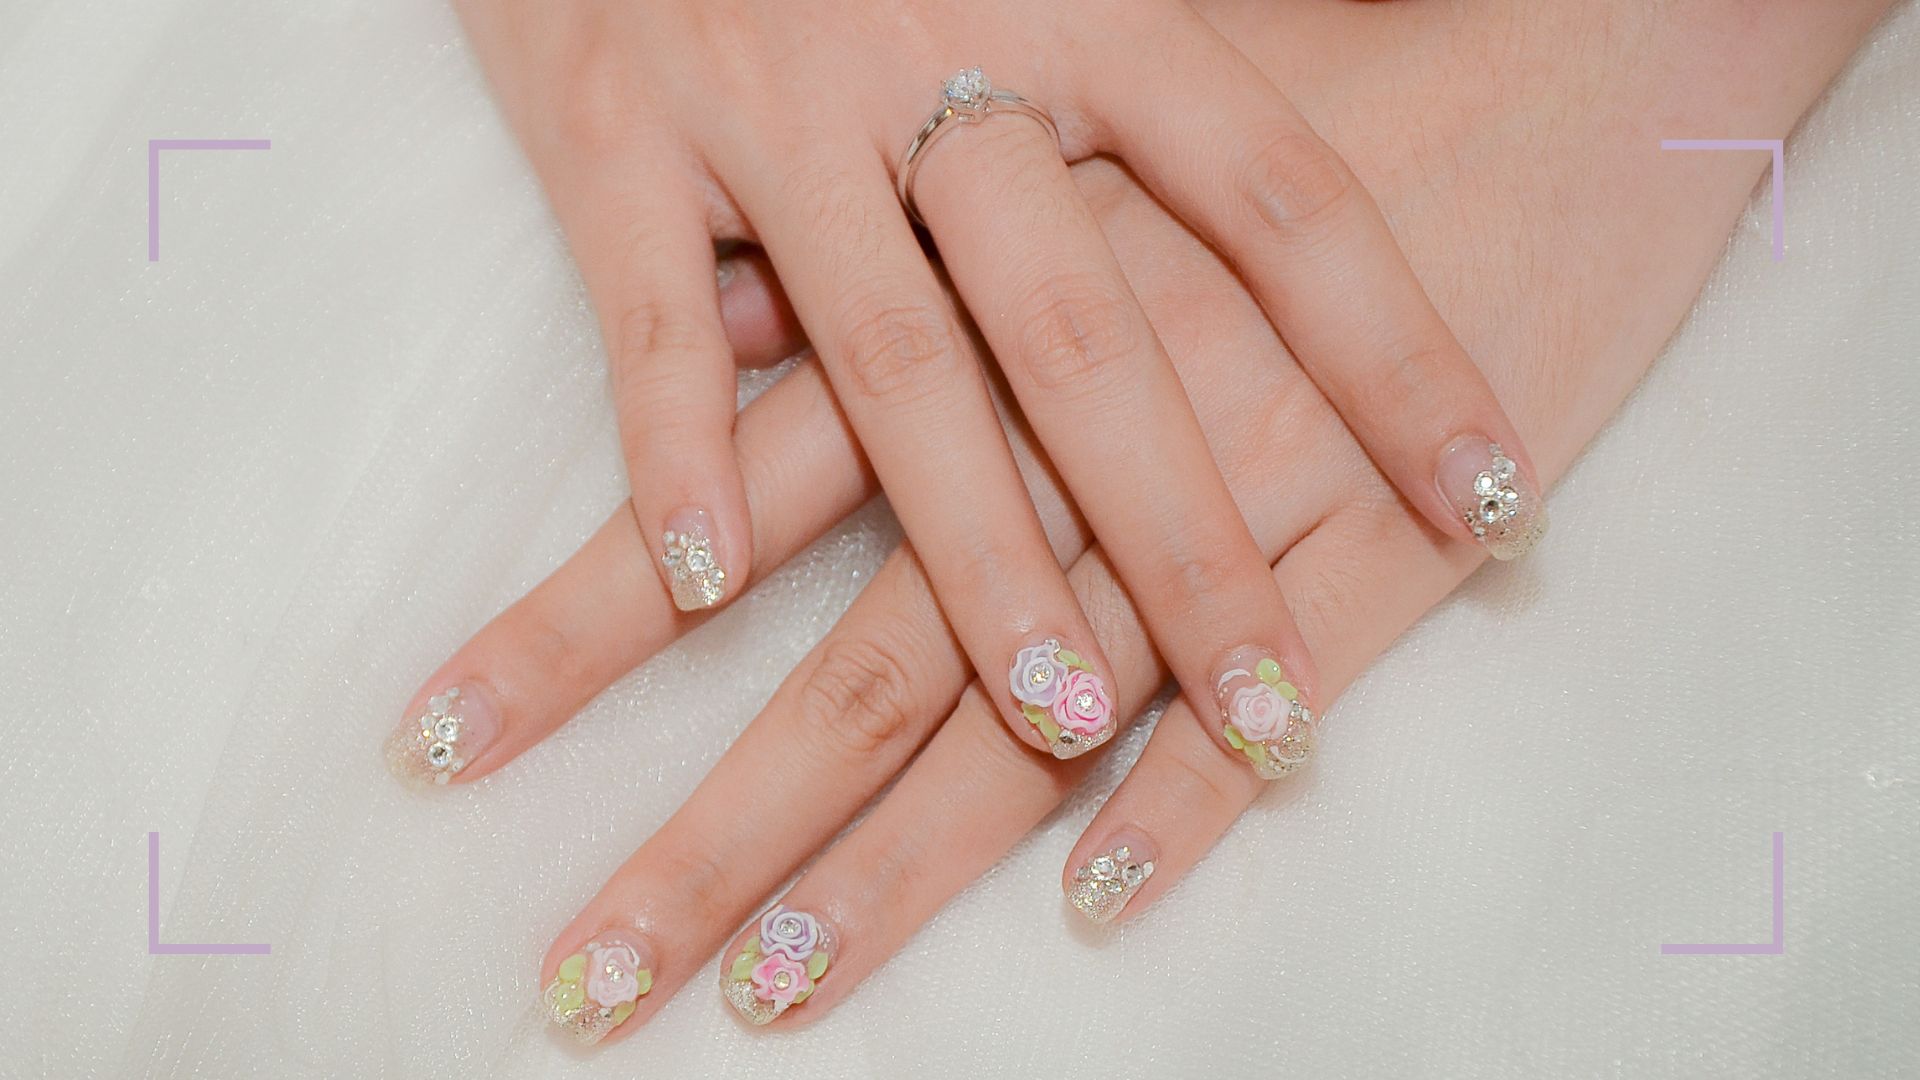 Bridal Nail Art Extravaganza: 10 Designs to Steal the Show